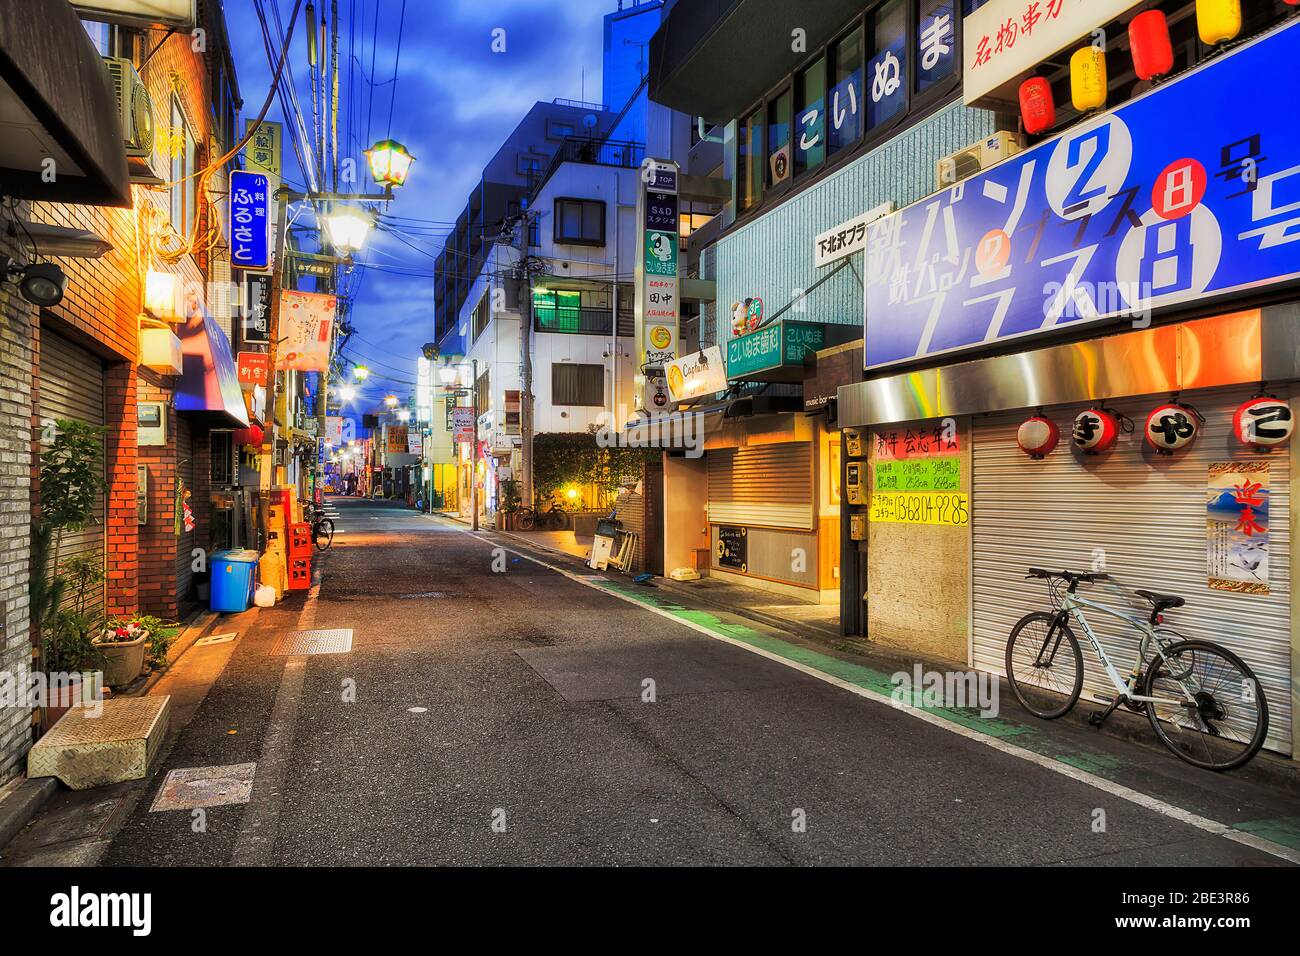 Tokyo, Japan - 2 Jan 2020: Local shopping street in Shimo-Kitazawa district of Tokyo in erarly morning before crowds with closed shops. Stock Photo